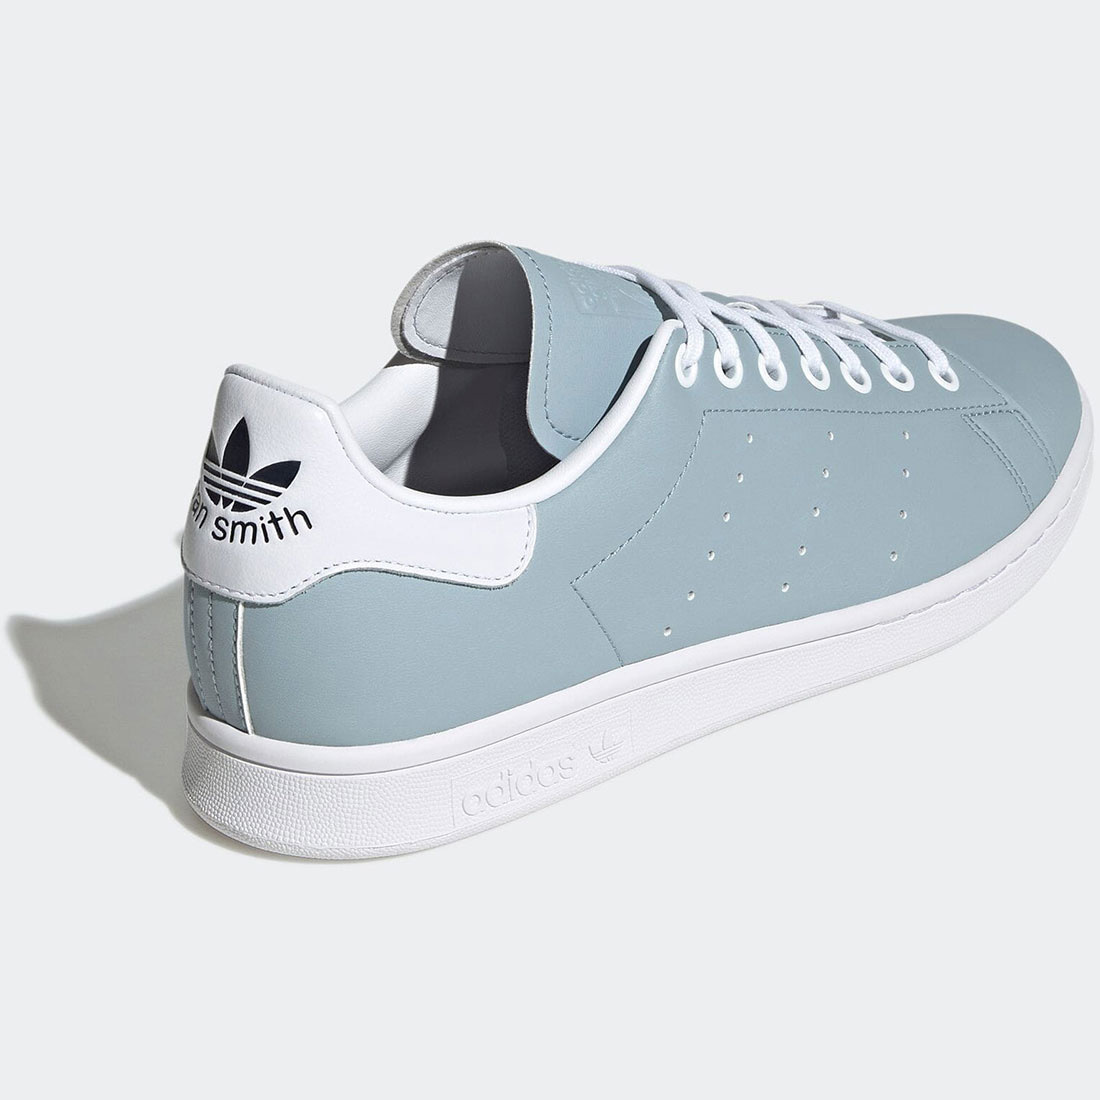  Adidas 26.5cm view ti& Youth Stansmith gray white tax included regular price 14300 jpy adidas BEAUTY&YOUTH STAN SMITH BY ①